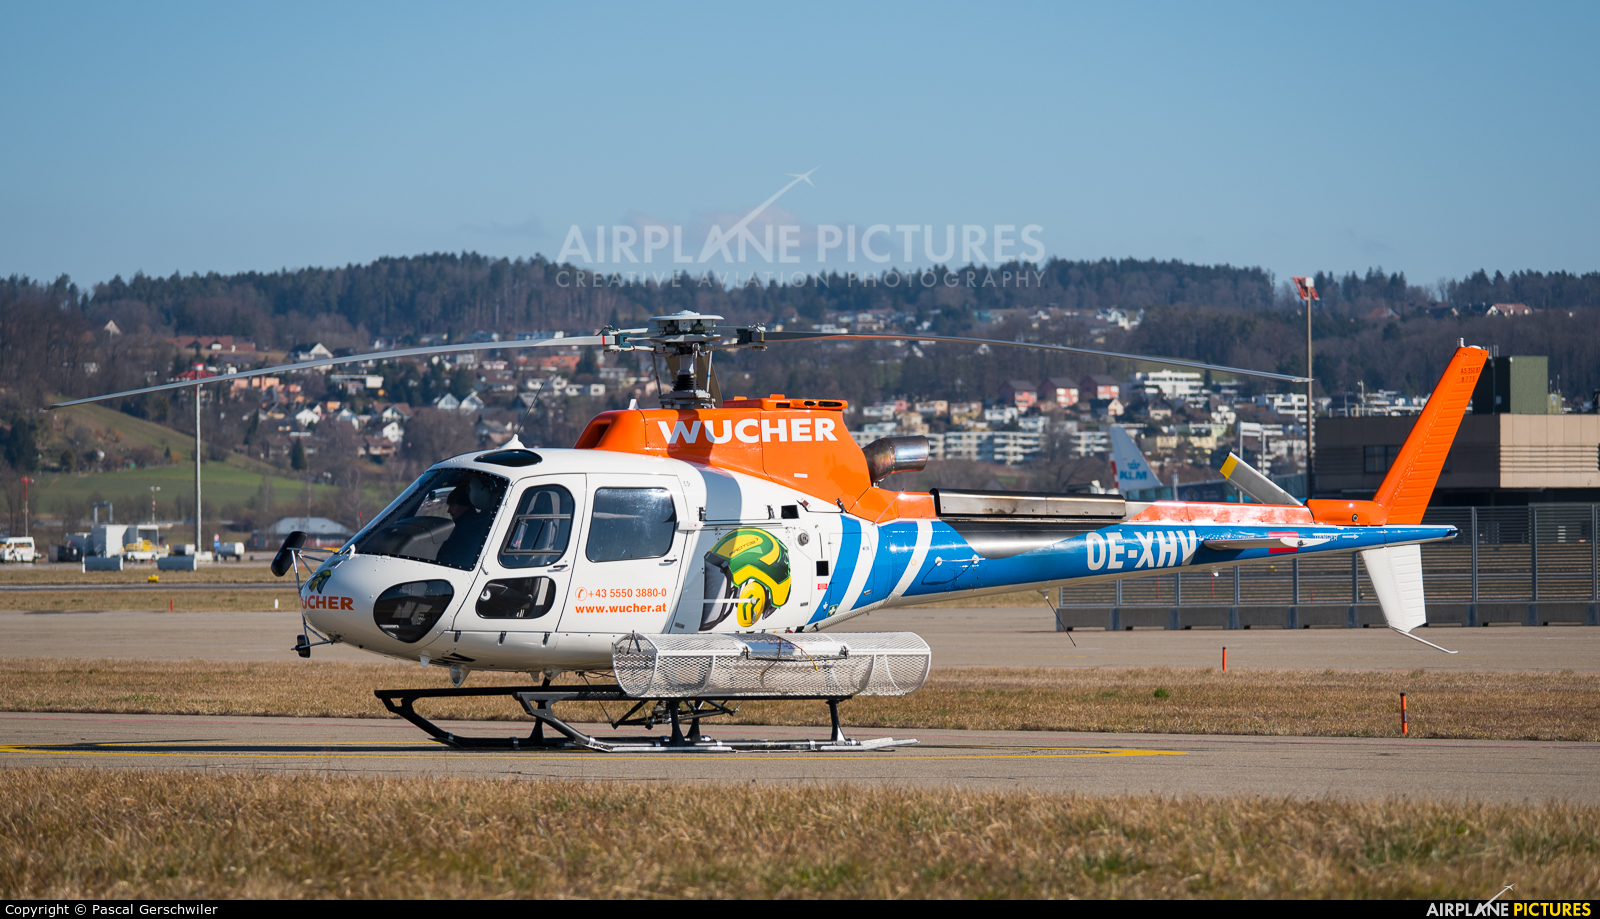 Wucher Helicopter OE-XHV aircraft at Zurich